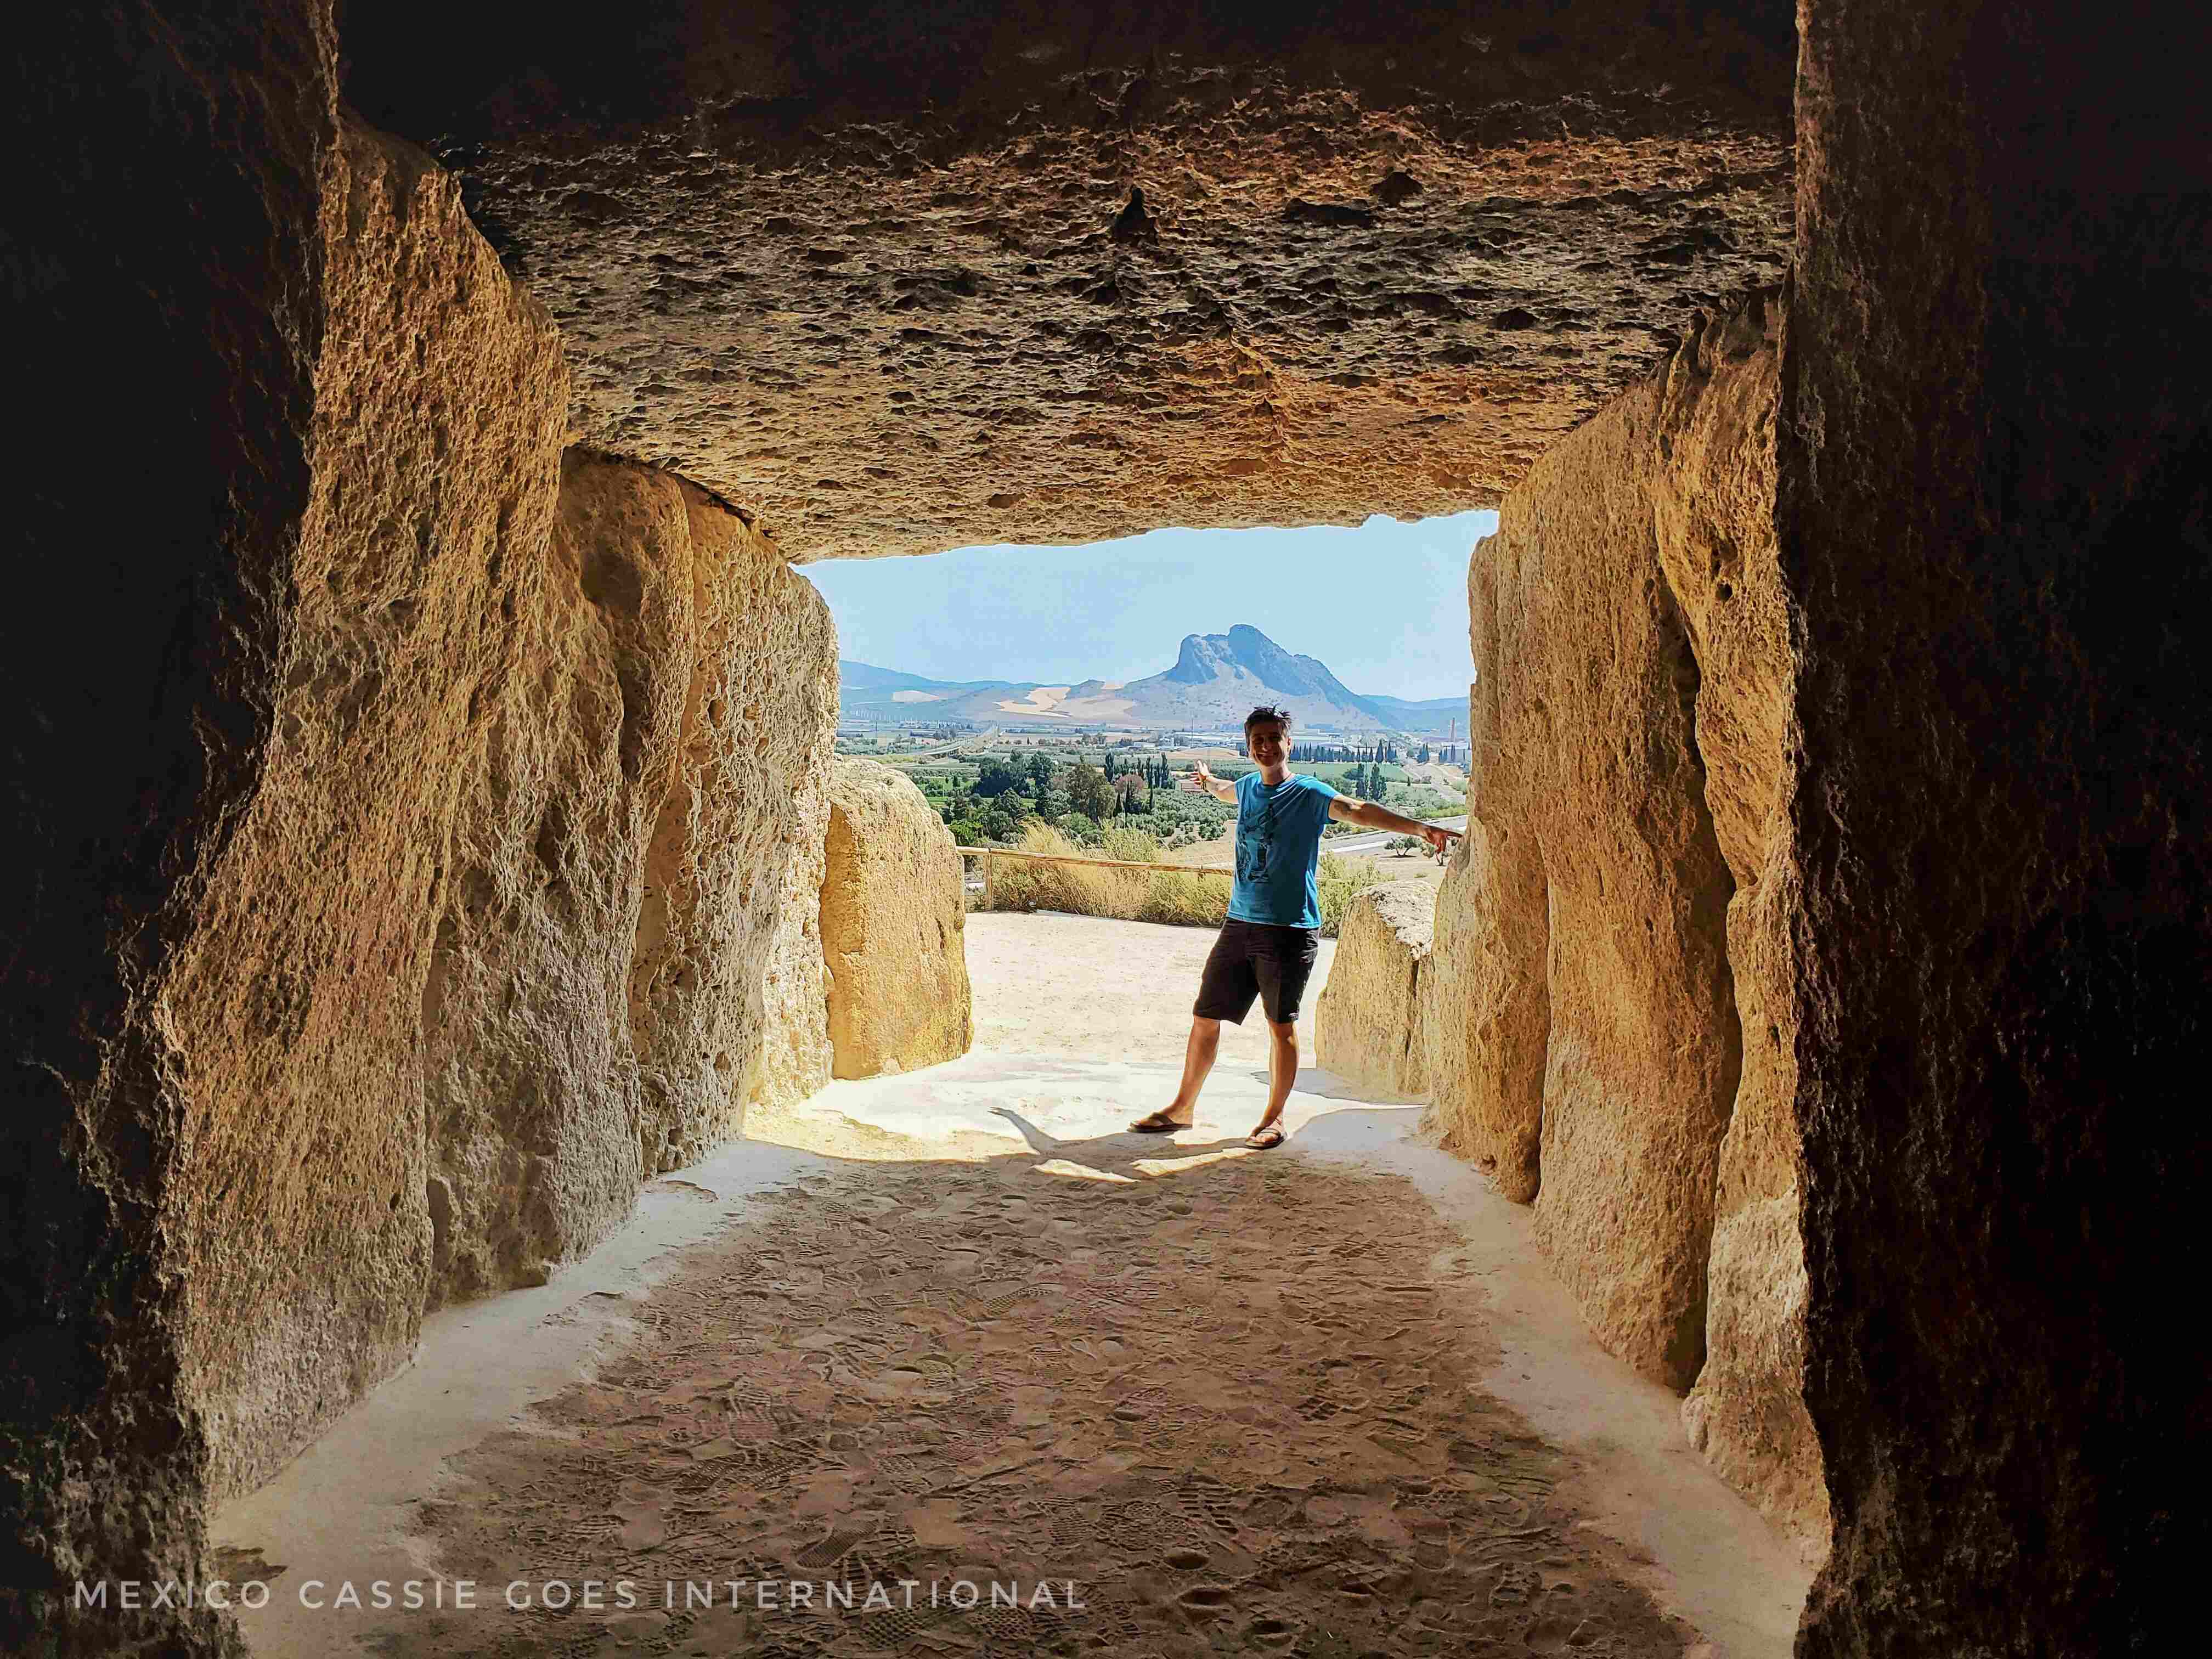 view from inside a dolmen. cassie in foreground and prone peña de los enamorados in background